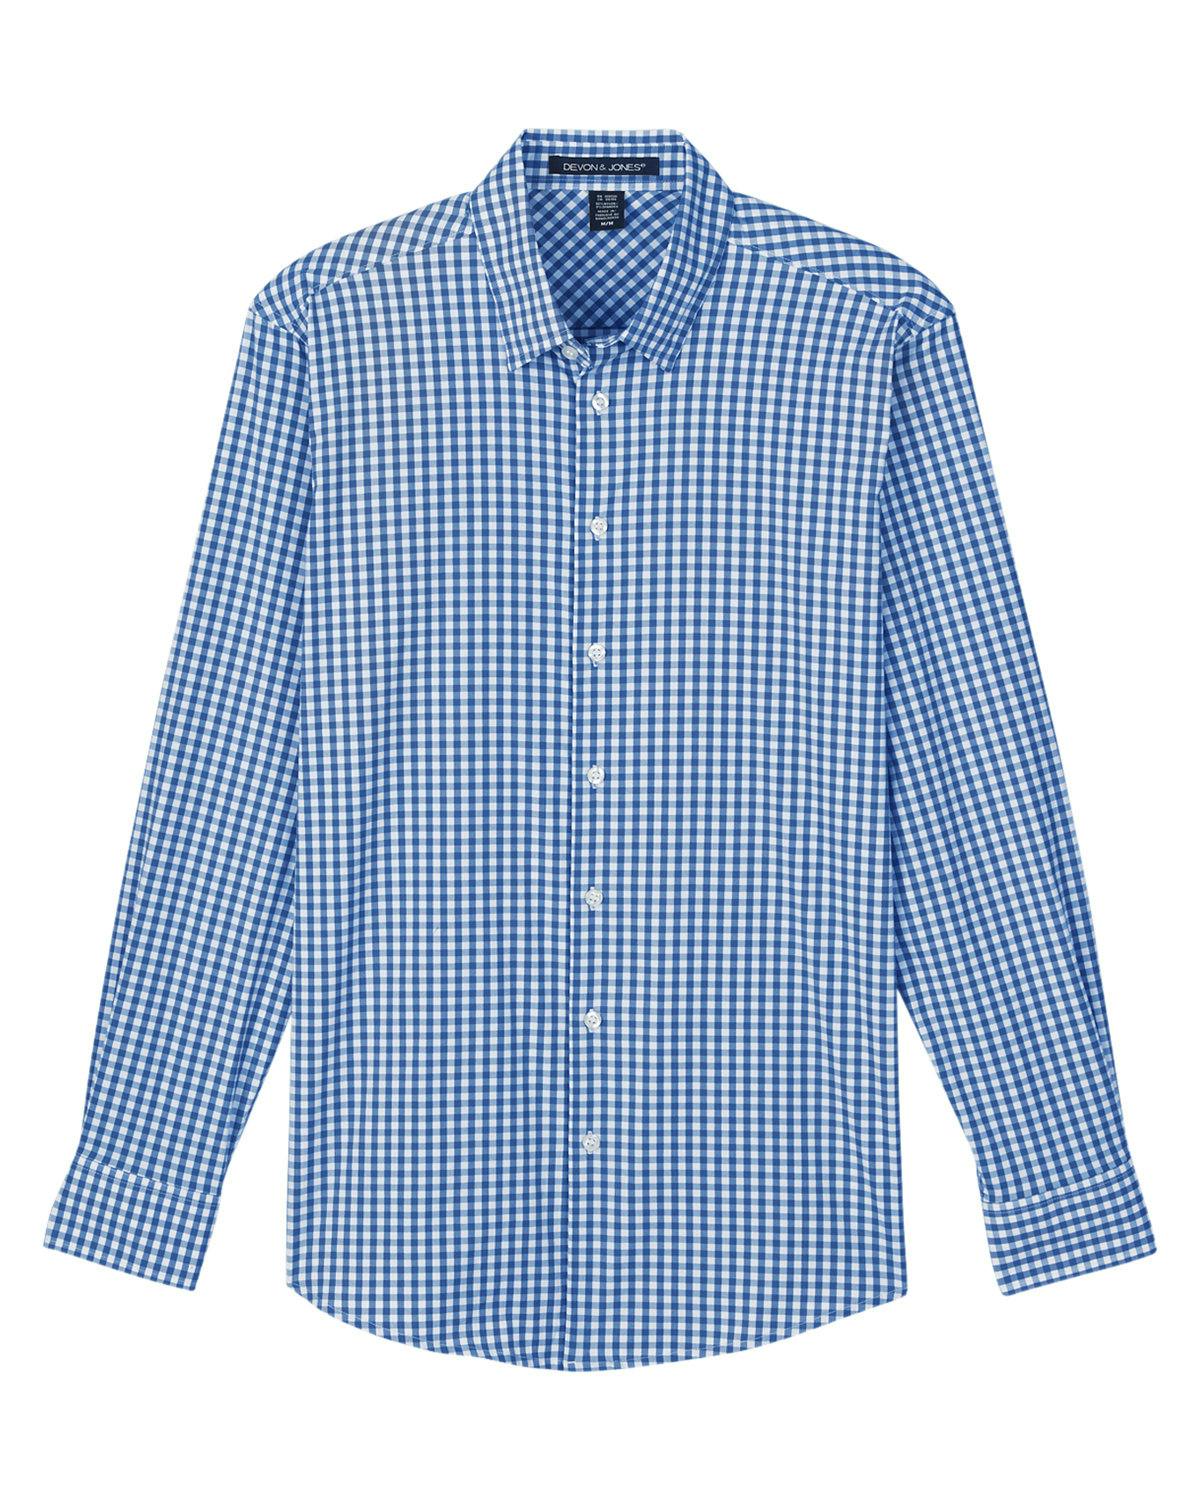 Image for CrownLux Performance® Men's Gingham Shirt